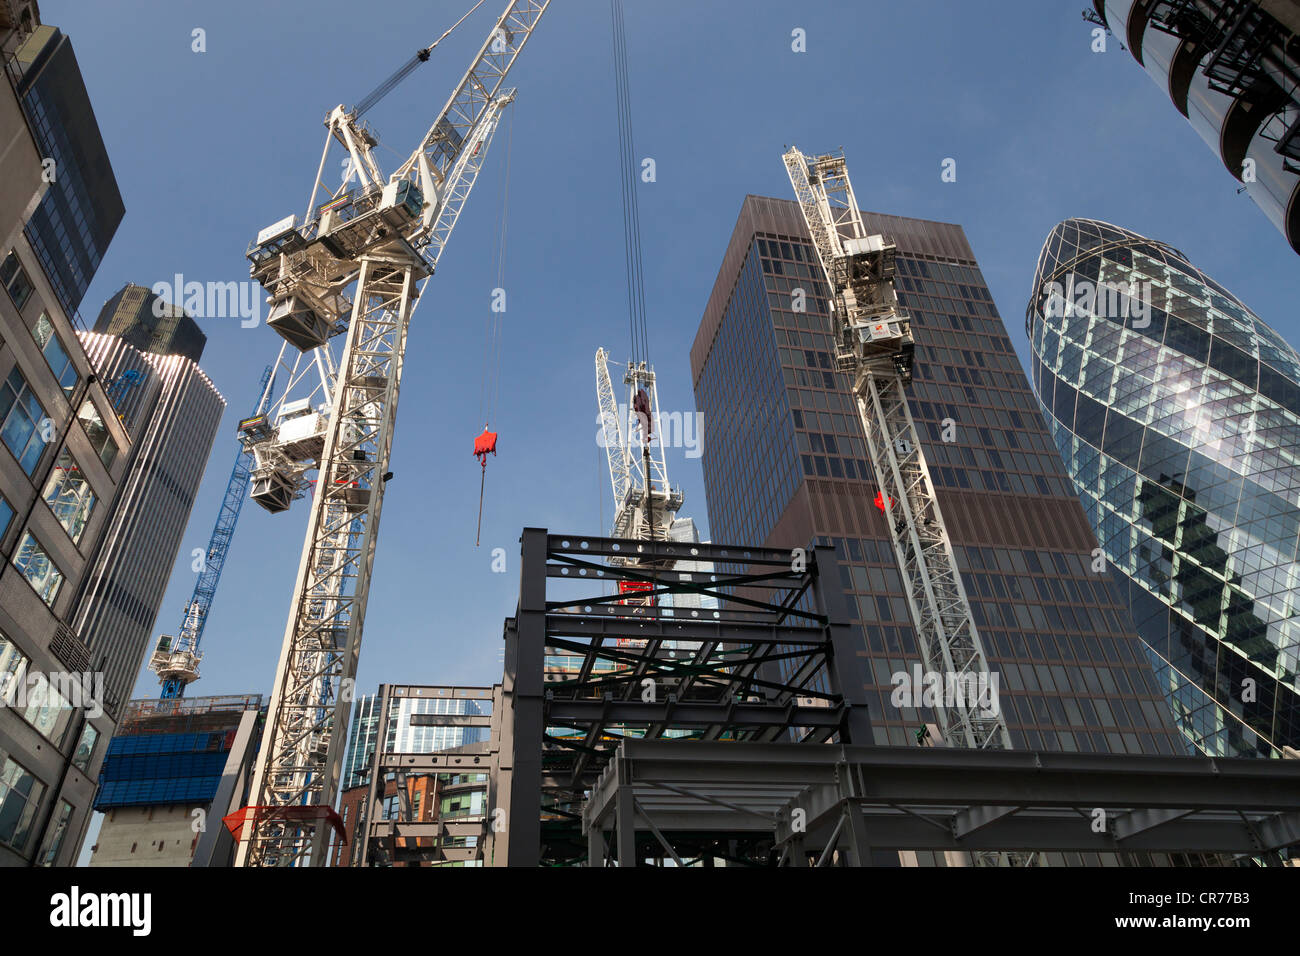 The Leadenhall Building - cheese-grater - construction site 4, City of London Stock Photo